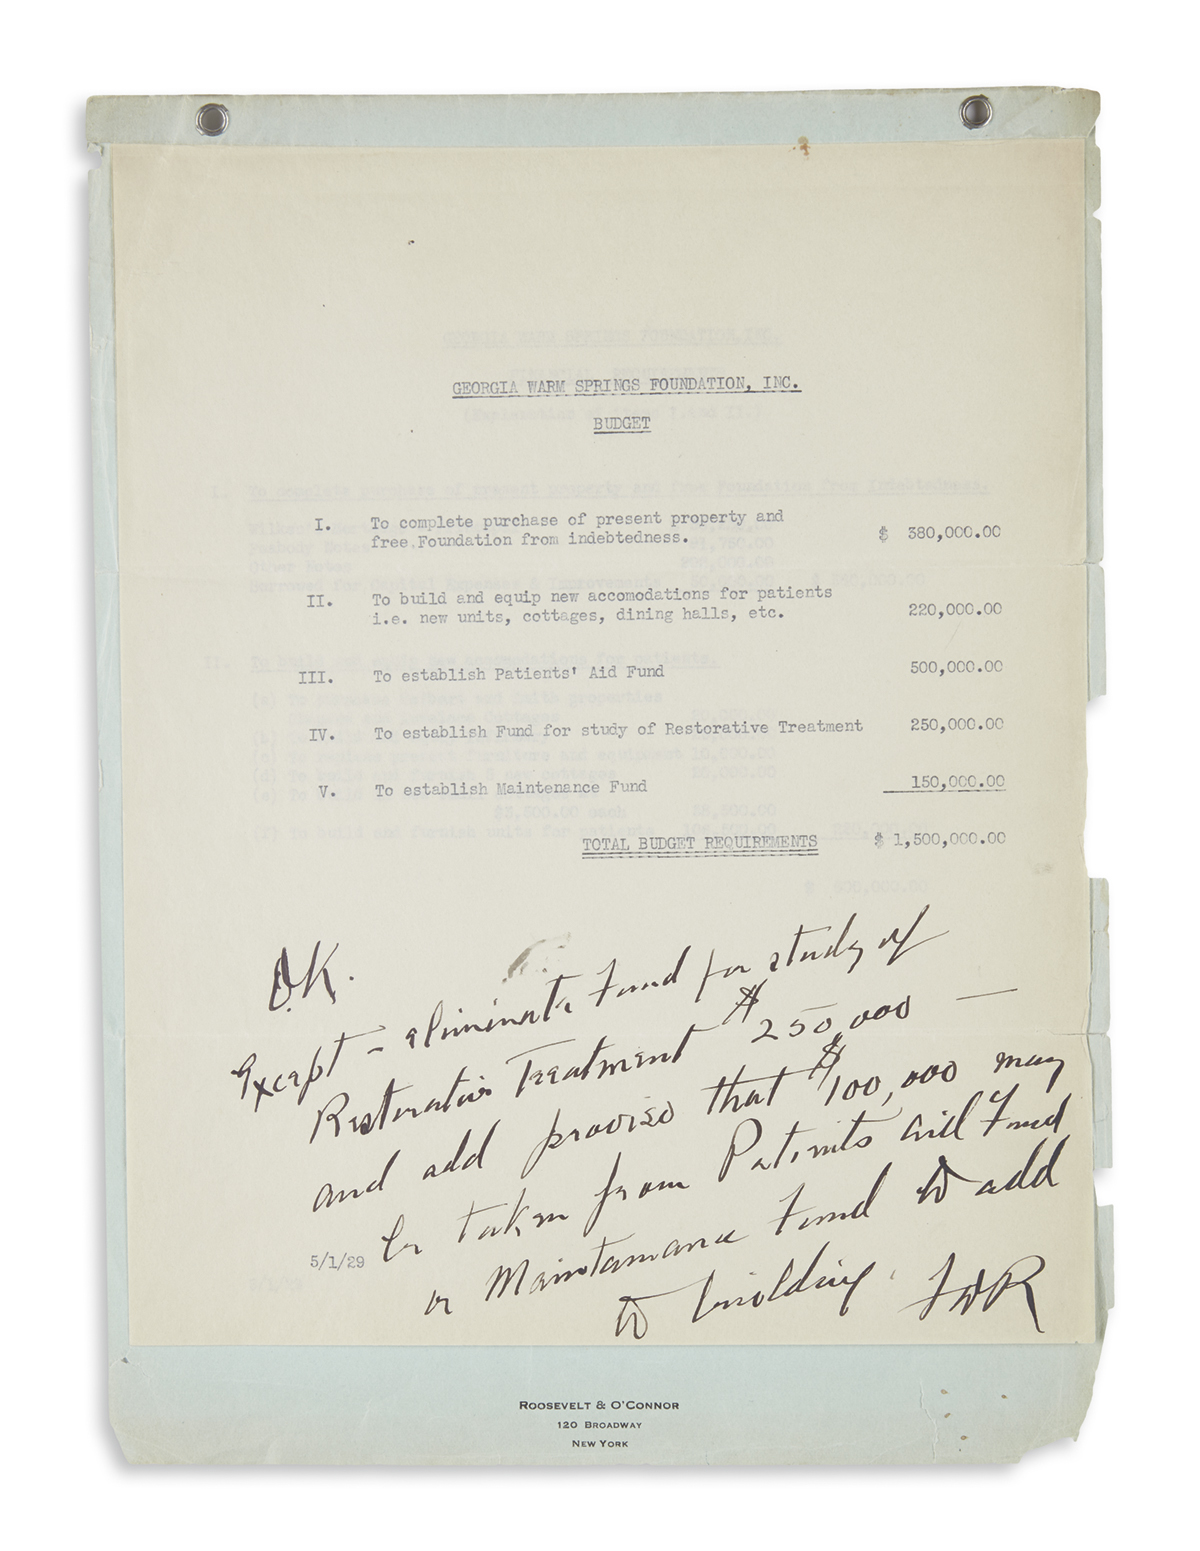 ROOSEVELT, FRANKLIN D. Autograph Endorsement Signed, FDR, as Governor, on the first page of a typed budget proposal for the Georgia